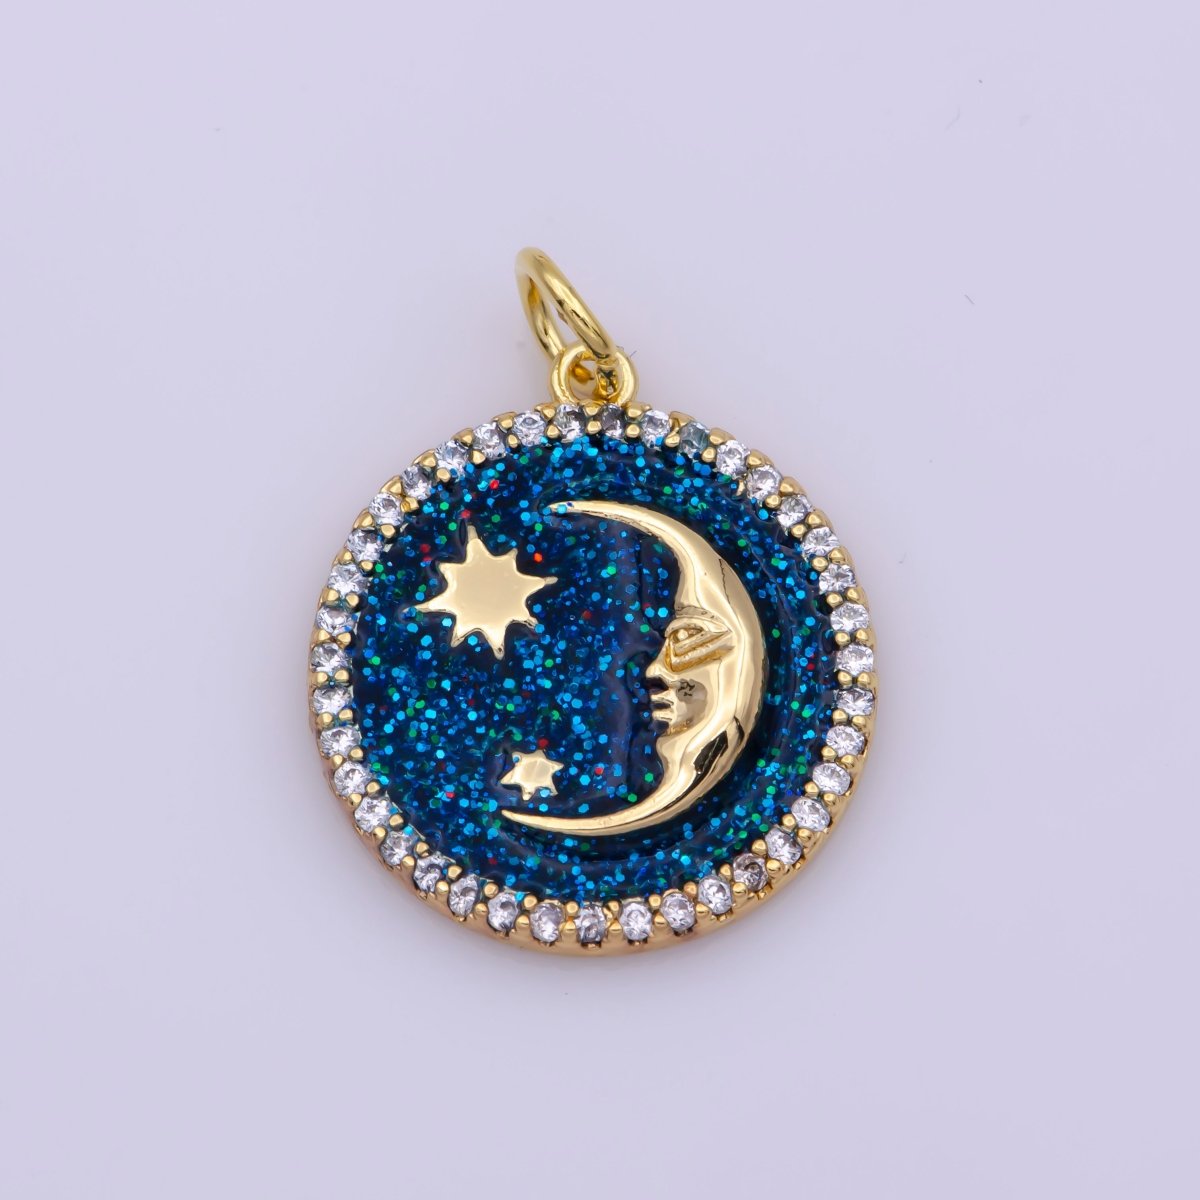 Tiny Celestial Charm White Blue Enamel Moon and Star Charms with Micro Pave Coin Base Moon Charms Jewelry Supplies M-906 - DLUXCA